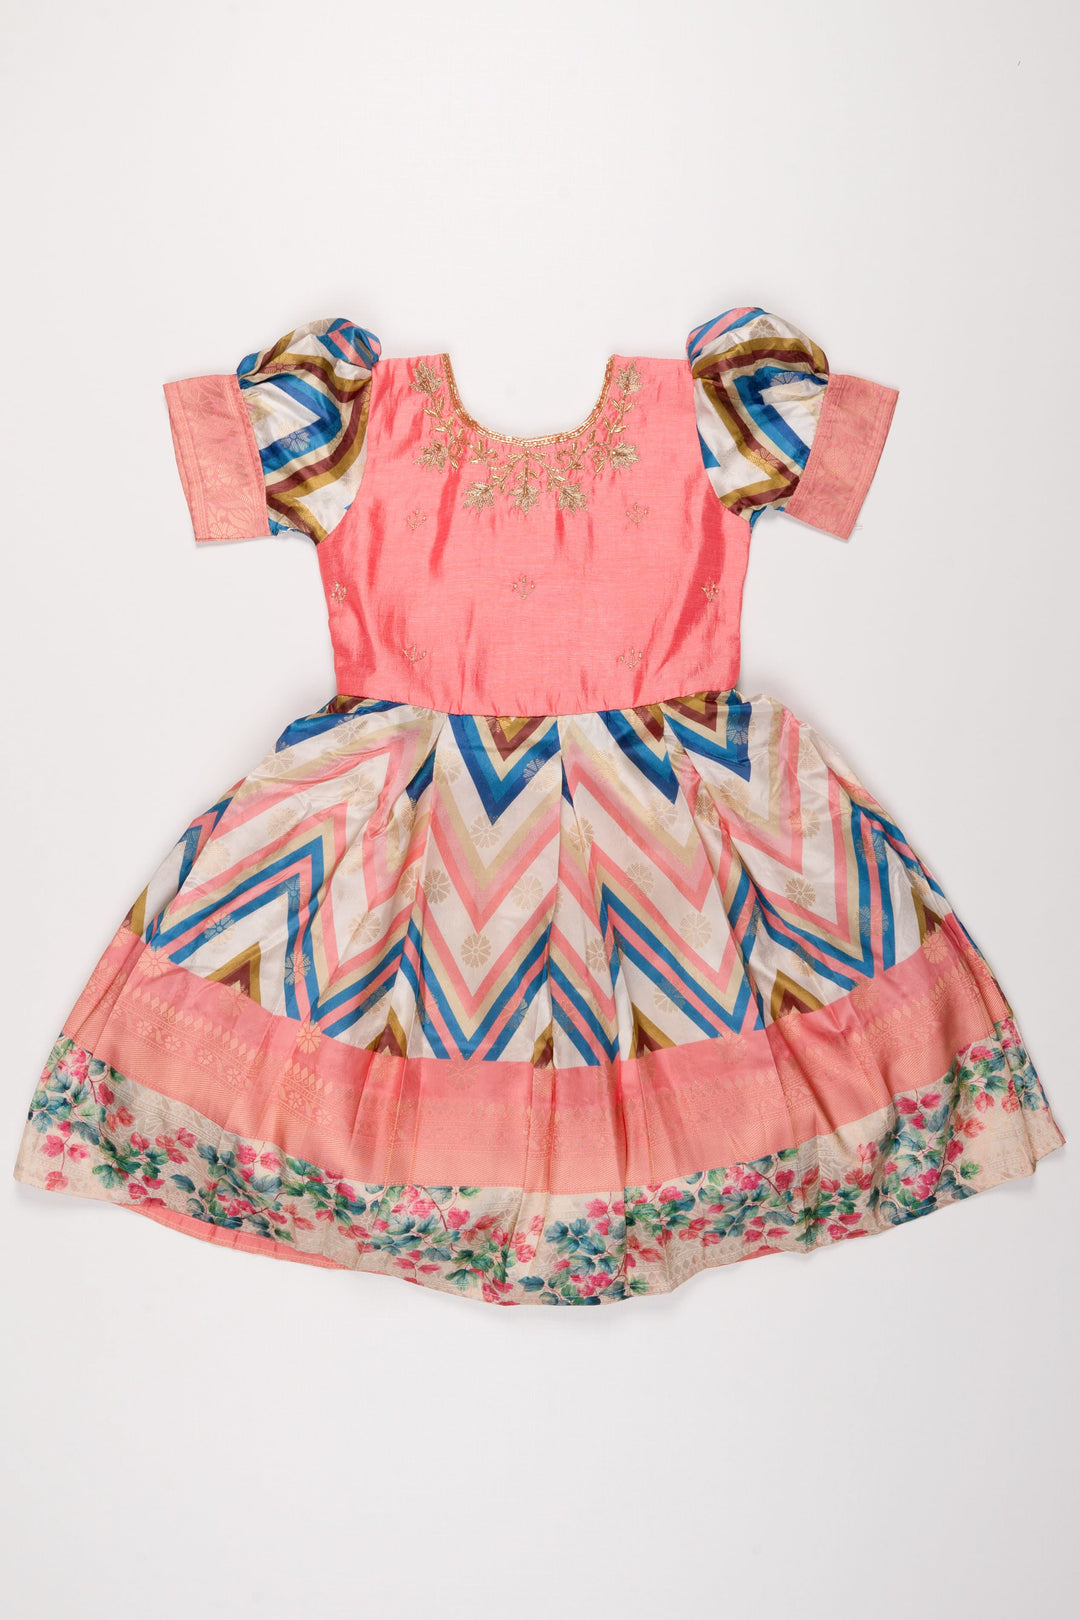 The Nesavu Silk Party Frock Vibrant Chevron and Floral Embroidered Frock with Pink Accents for Girls Nesavu 16 (1Y) / Pink SF735A-16 Girls Embroidered Chevron Frock | Festive Wear for Young Fashionistas | The Nesavu